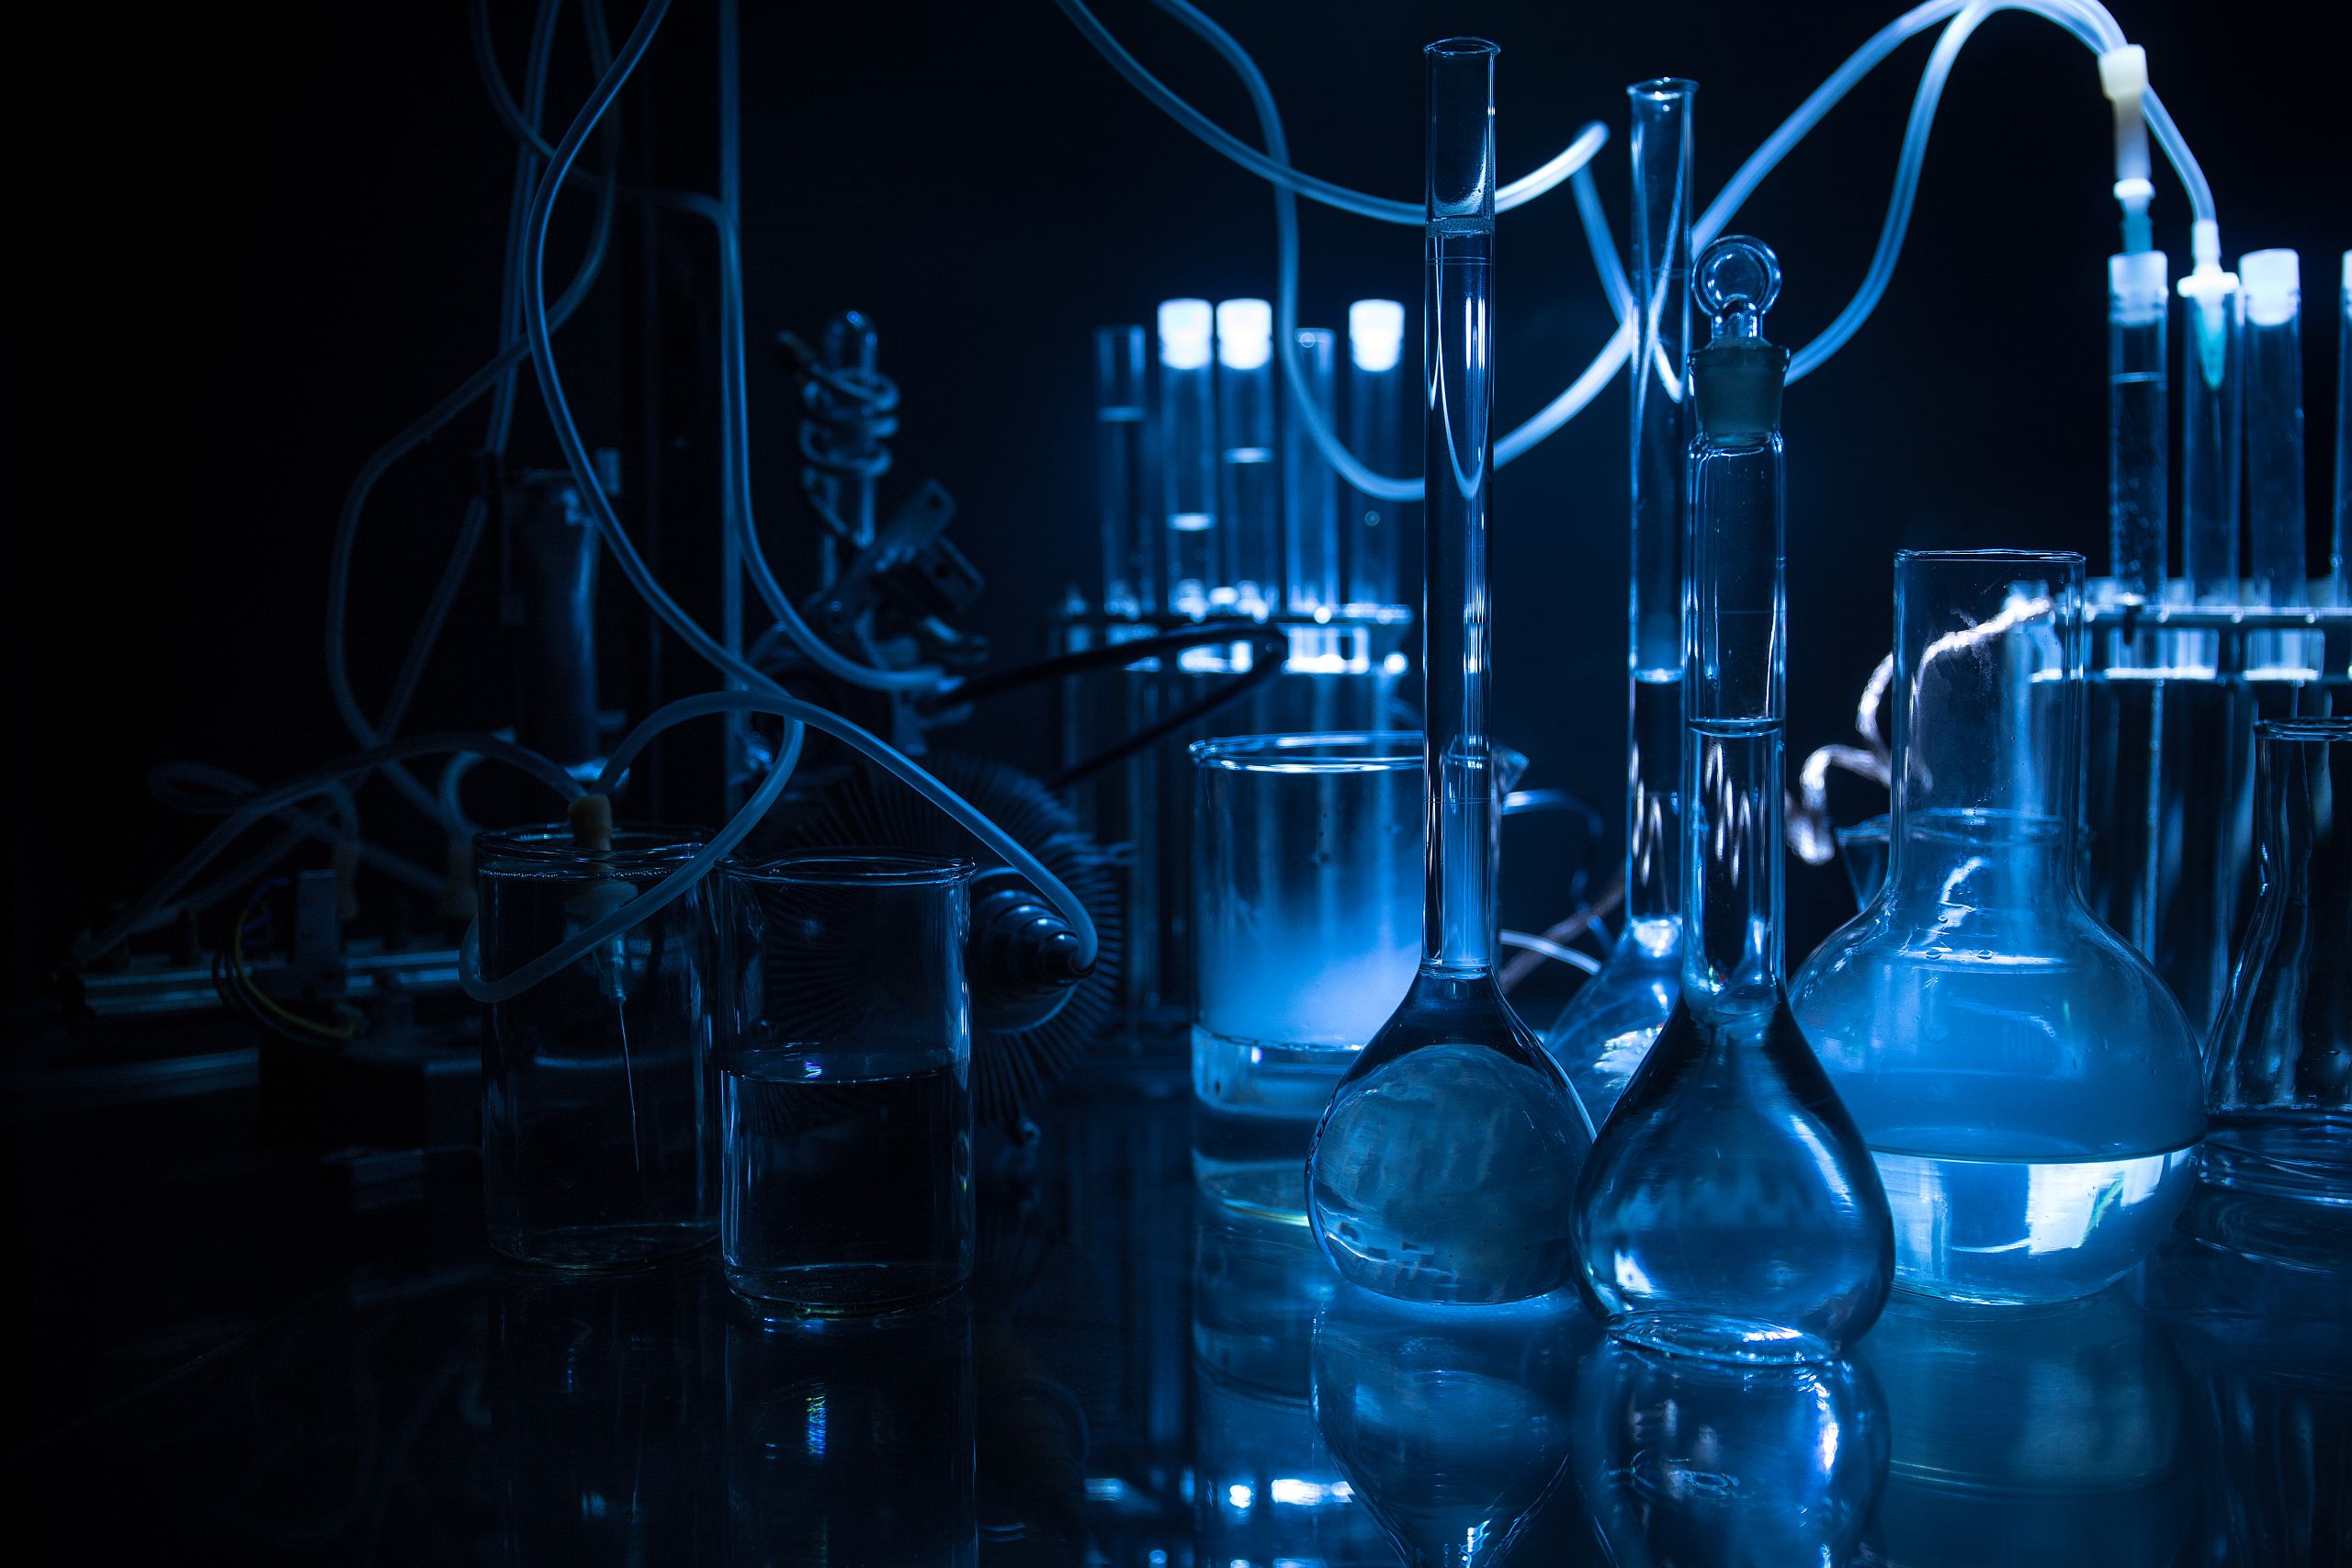 Acids in glassware and flasks in the chemical laboratory